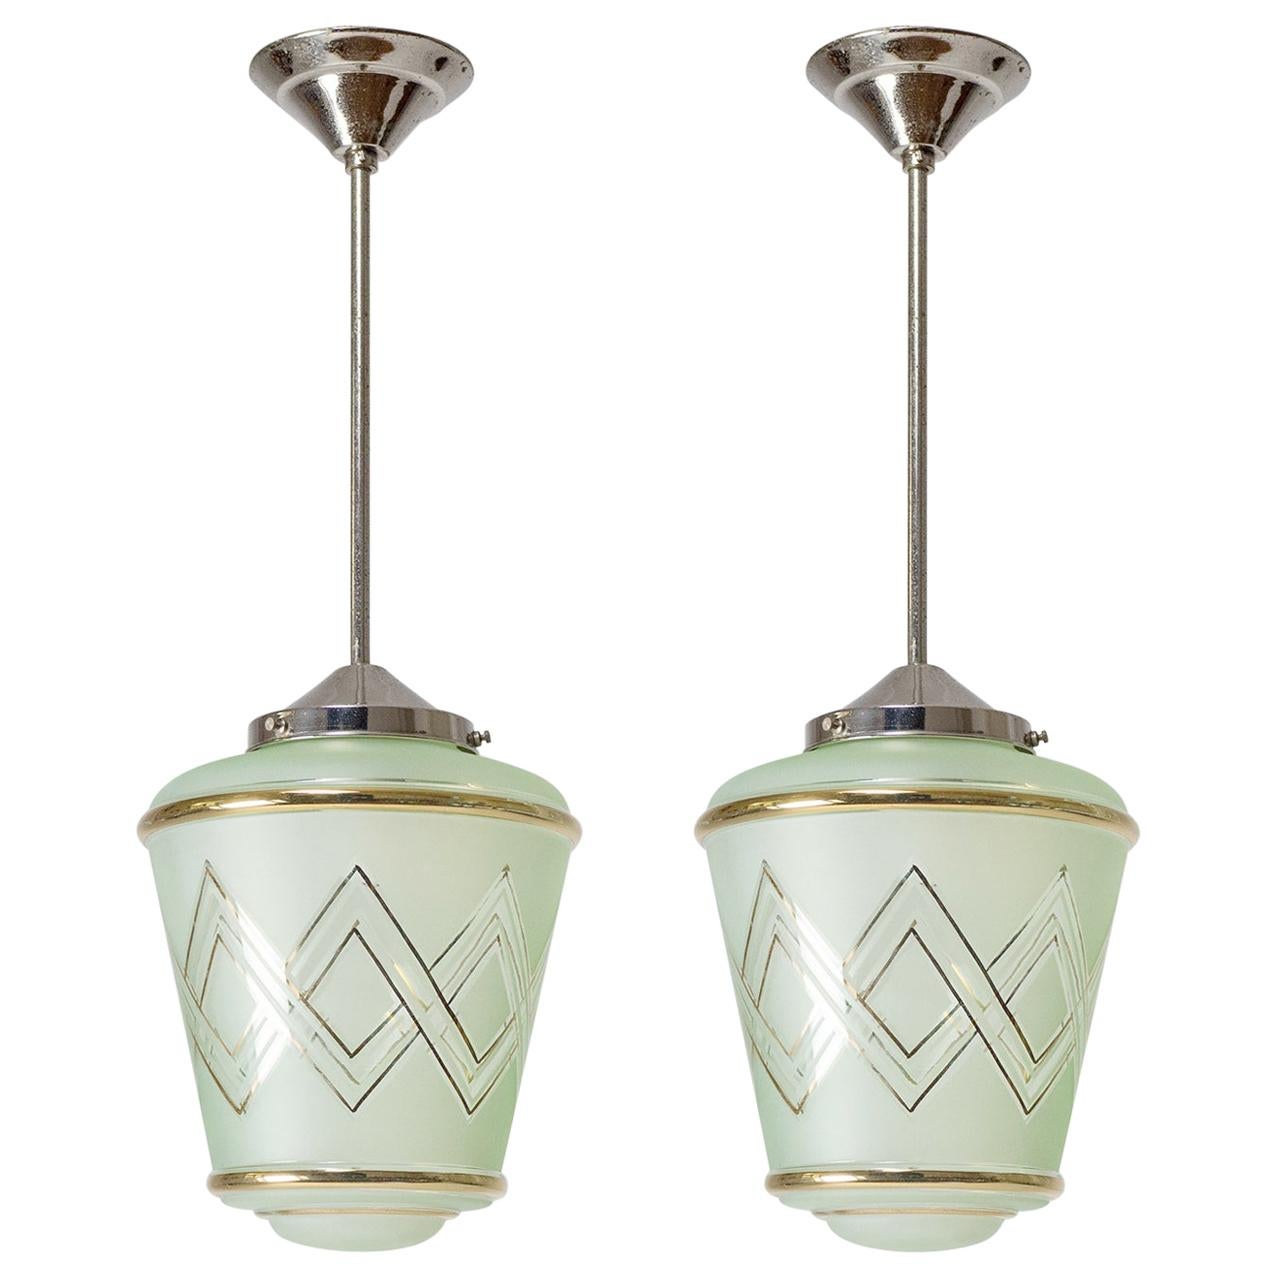 Pair of 1940s French Art Deco Lanterns, Mint Glass and Gold Paint